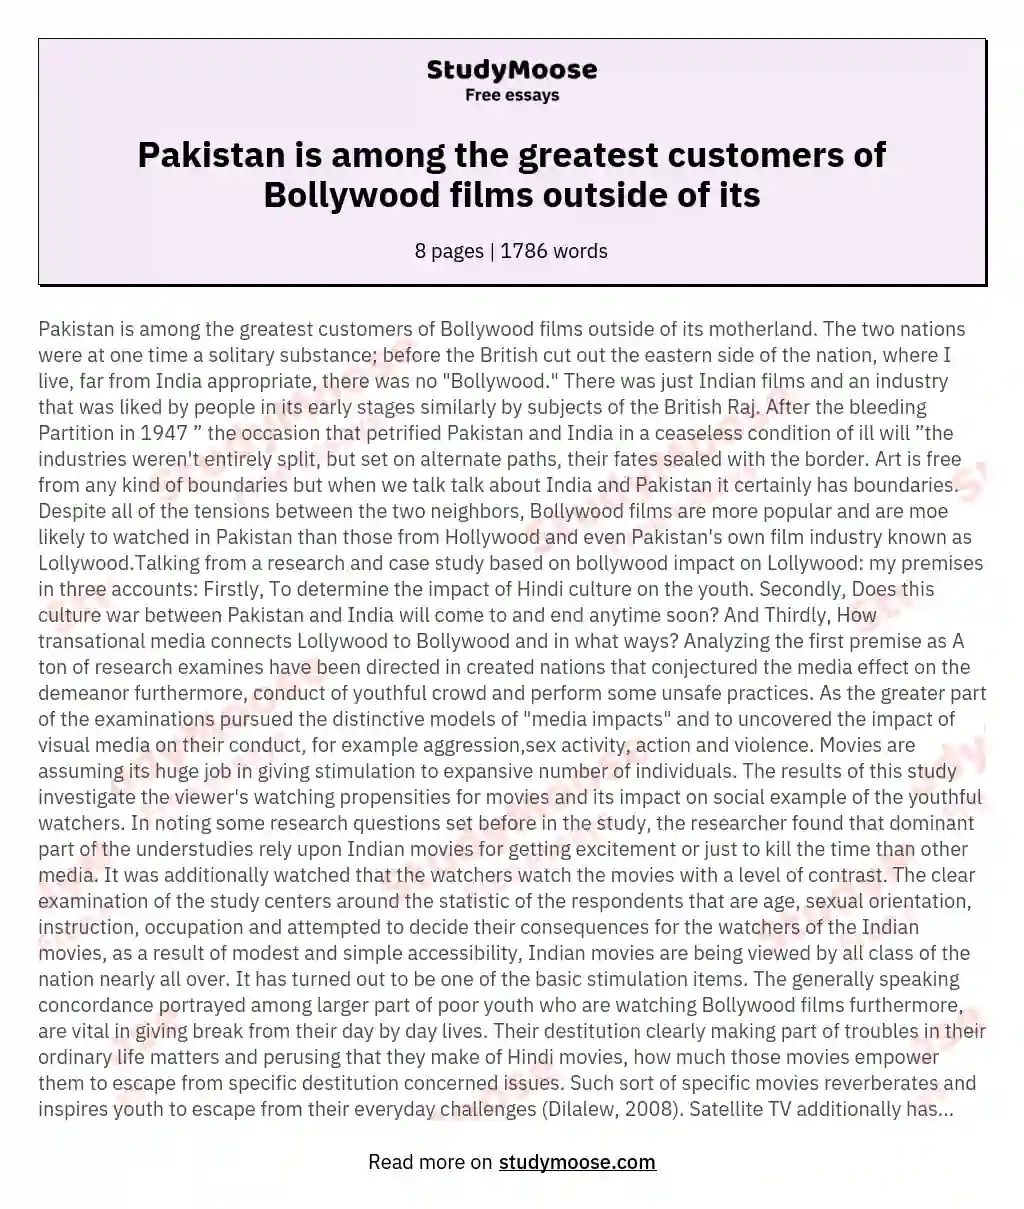 Pakistan is among the greatest customers of Bollywood films outside of its essay